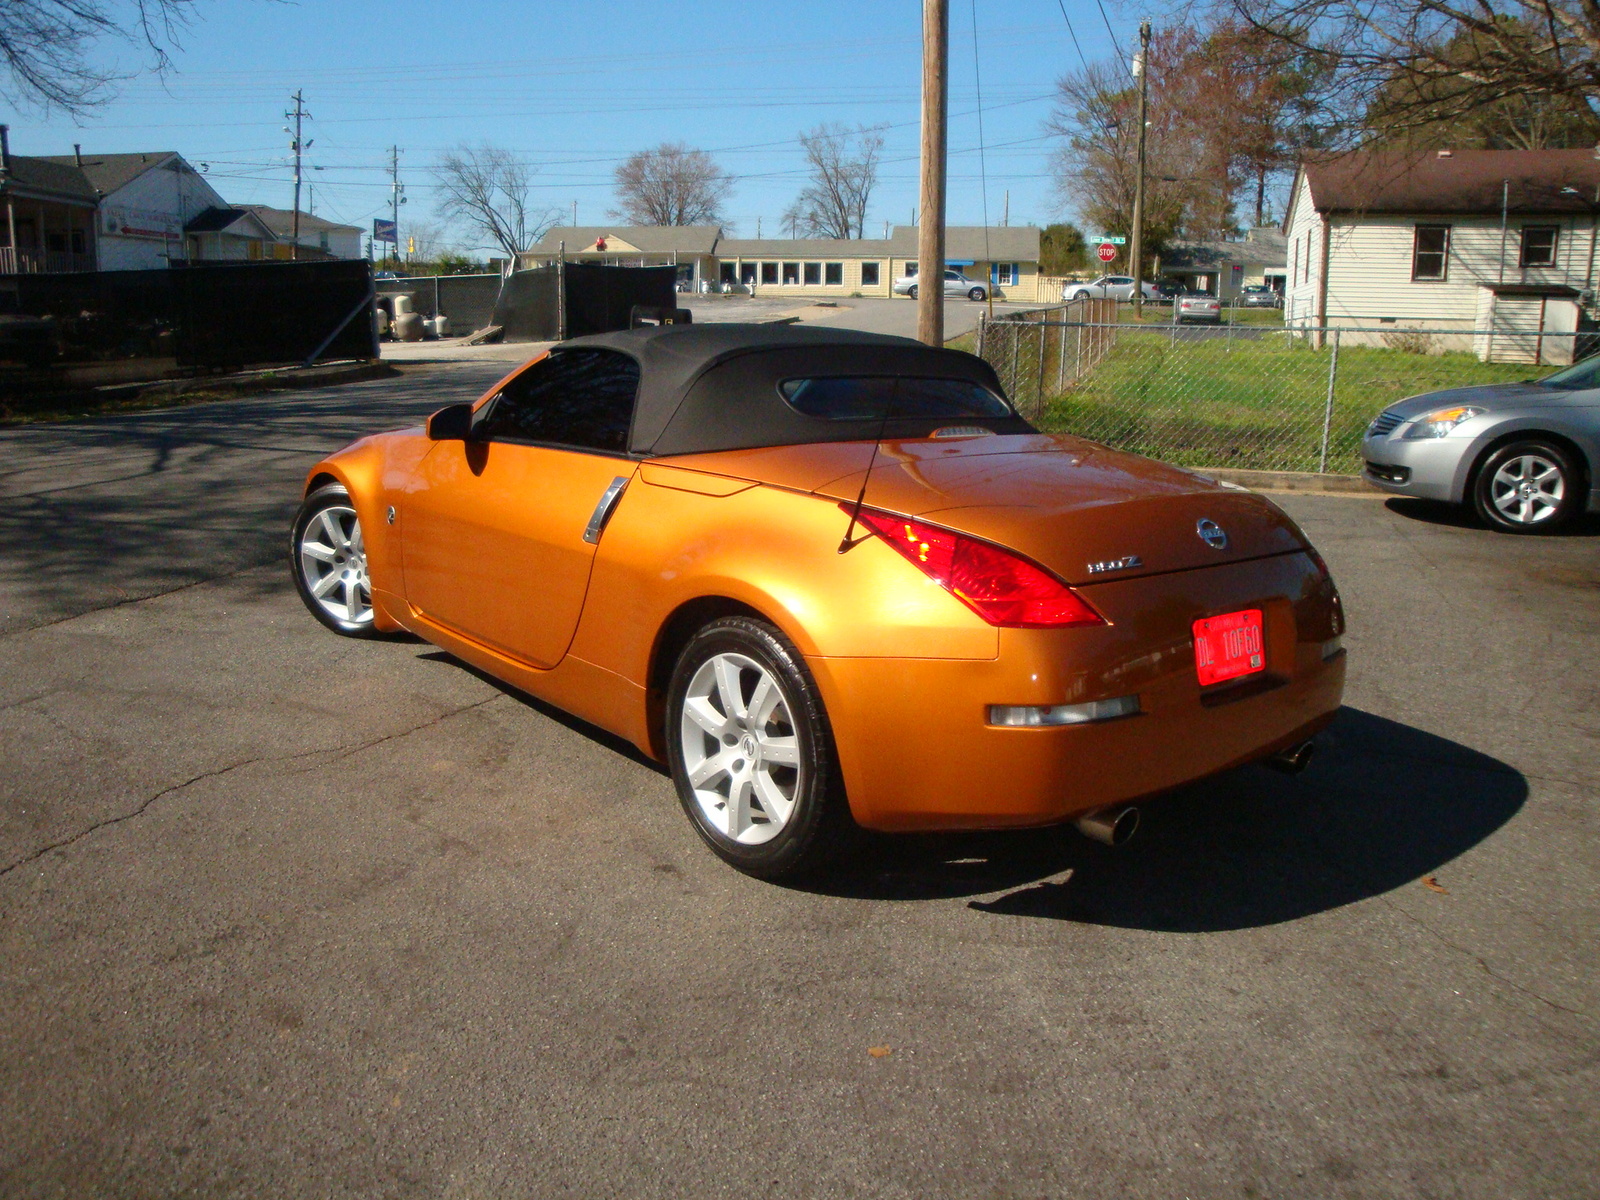 2004 Nissan 350z touring roadster reviews #7